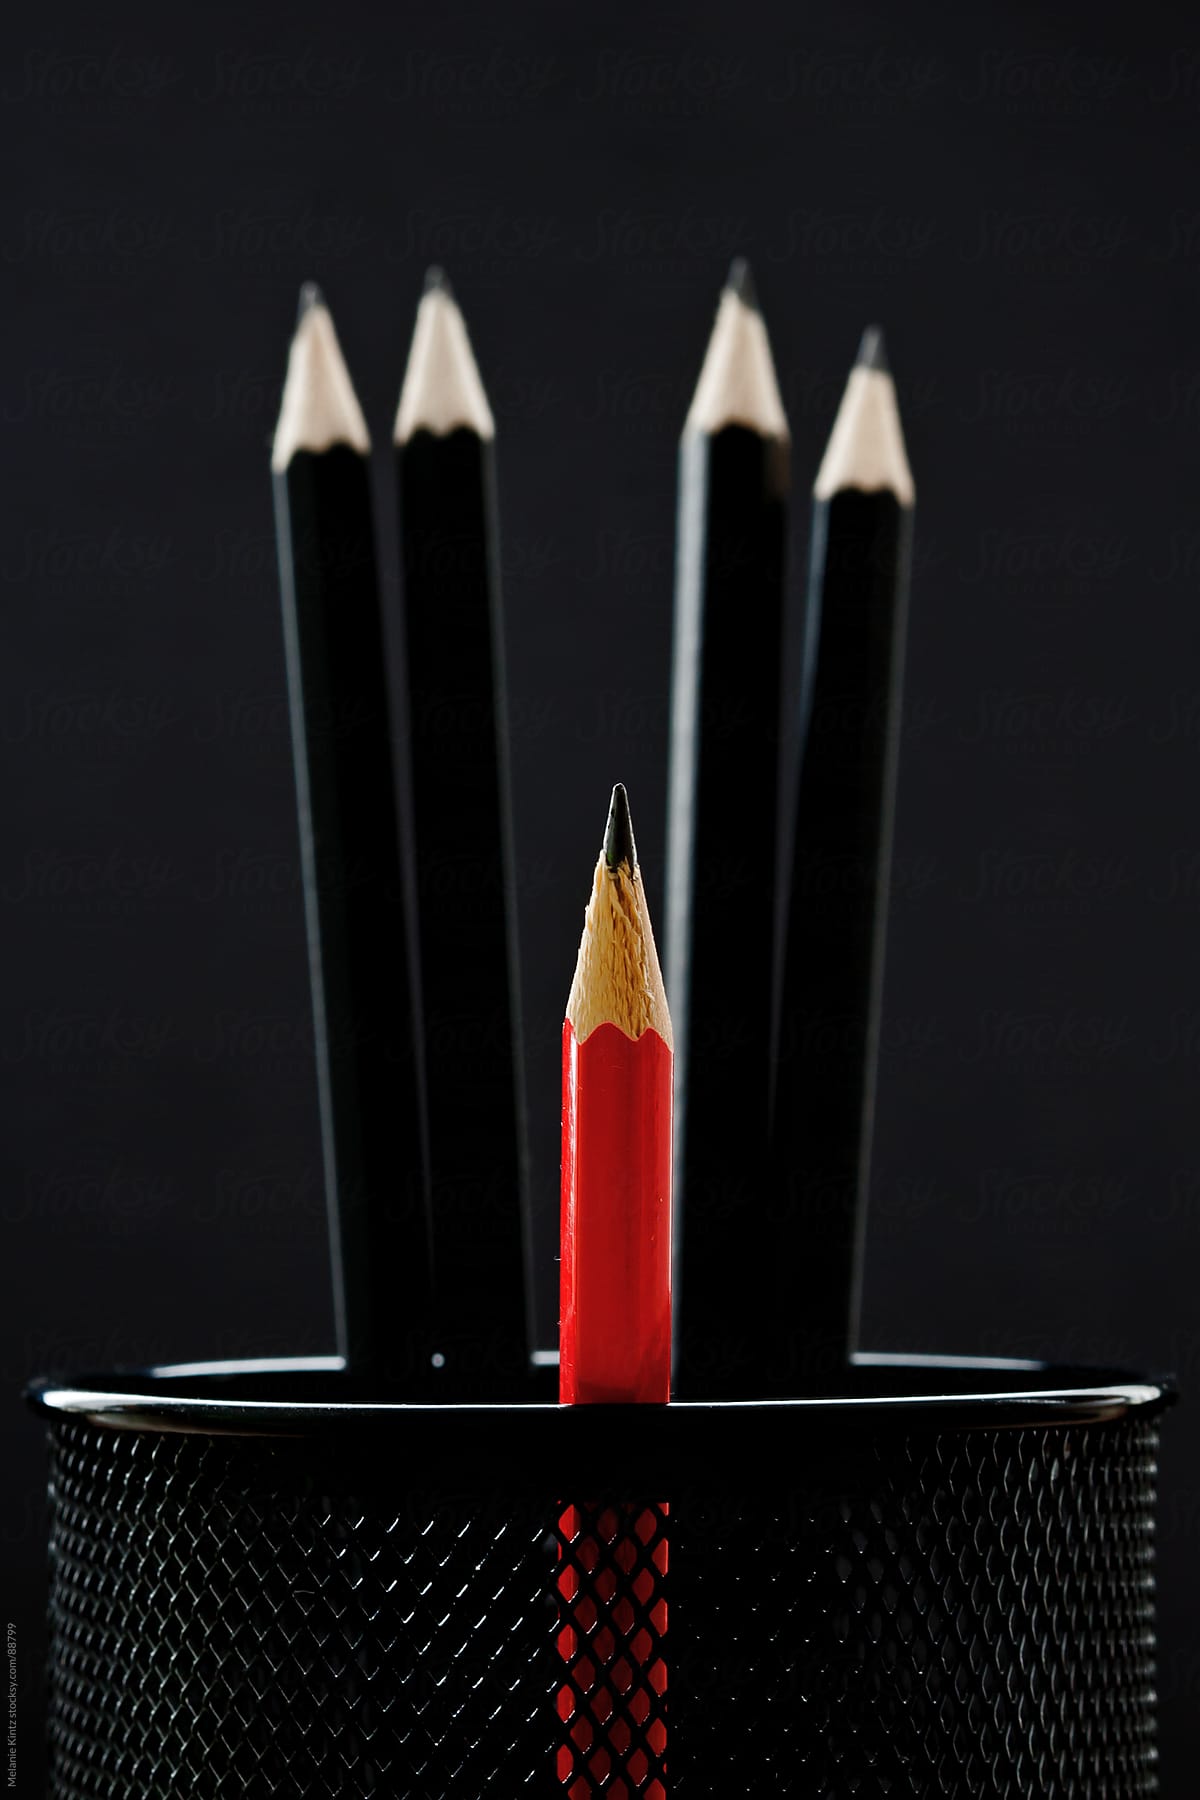 One Smaller Red Pencile Among A Group Of Other Black Pencils Before Black  Background by Stocksy Contributor Melanie Kintz - Stocksy